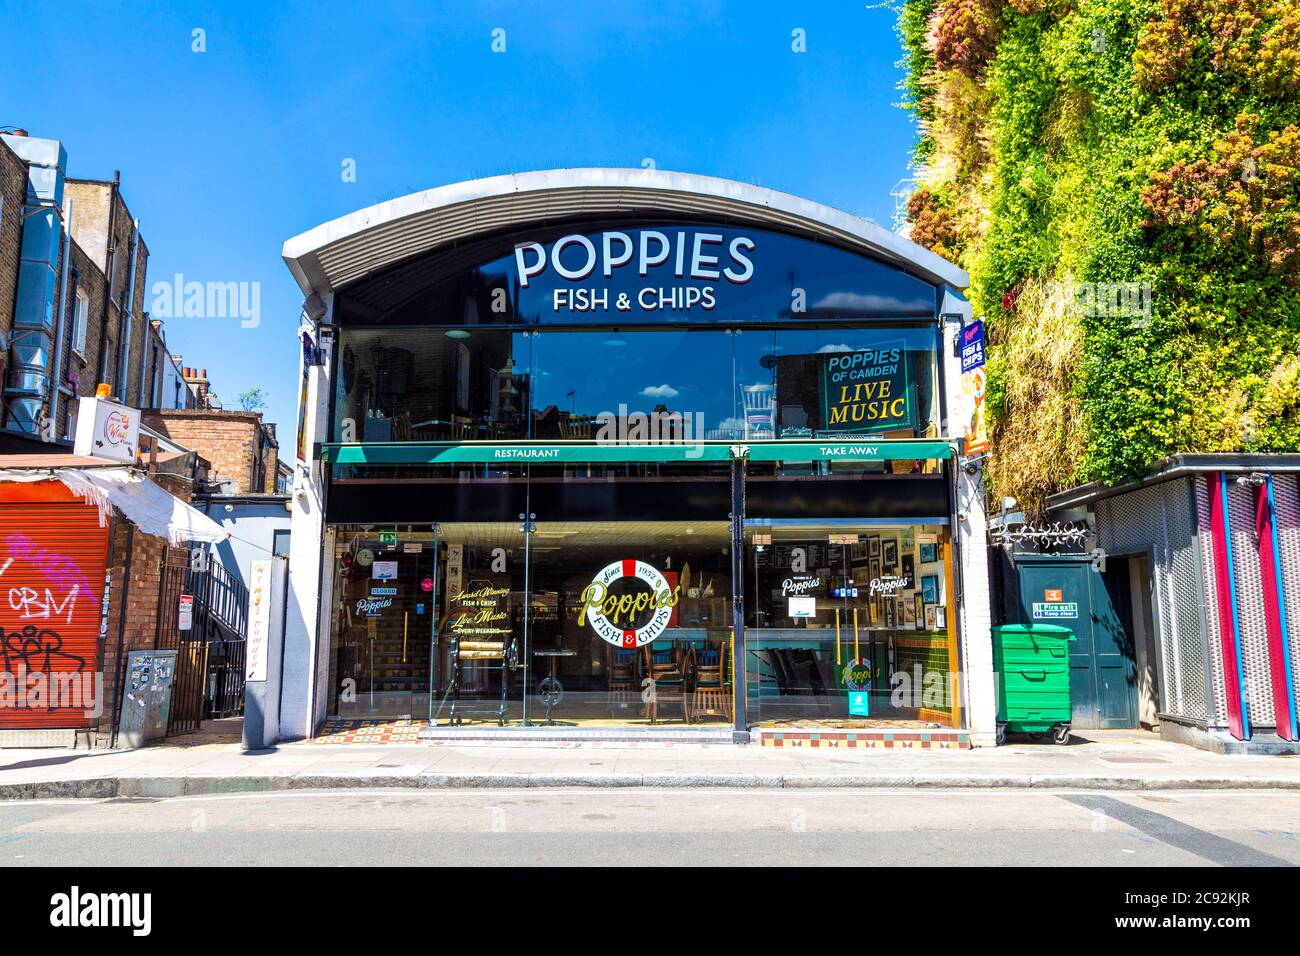 Exterior of Poppies Fish & Chips in Camden, London, UK Stock Photo